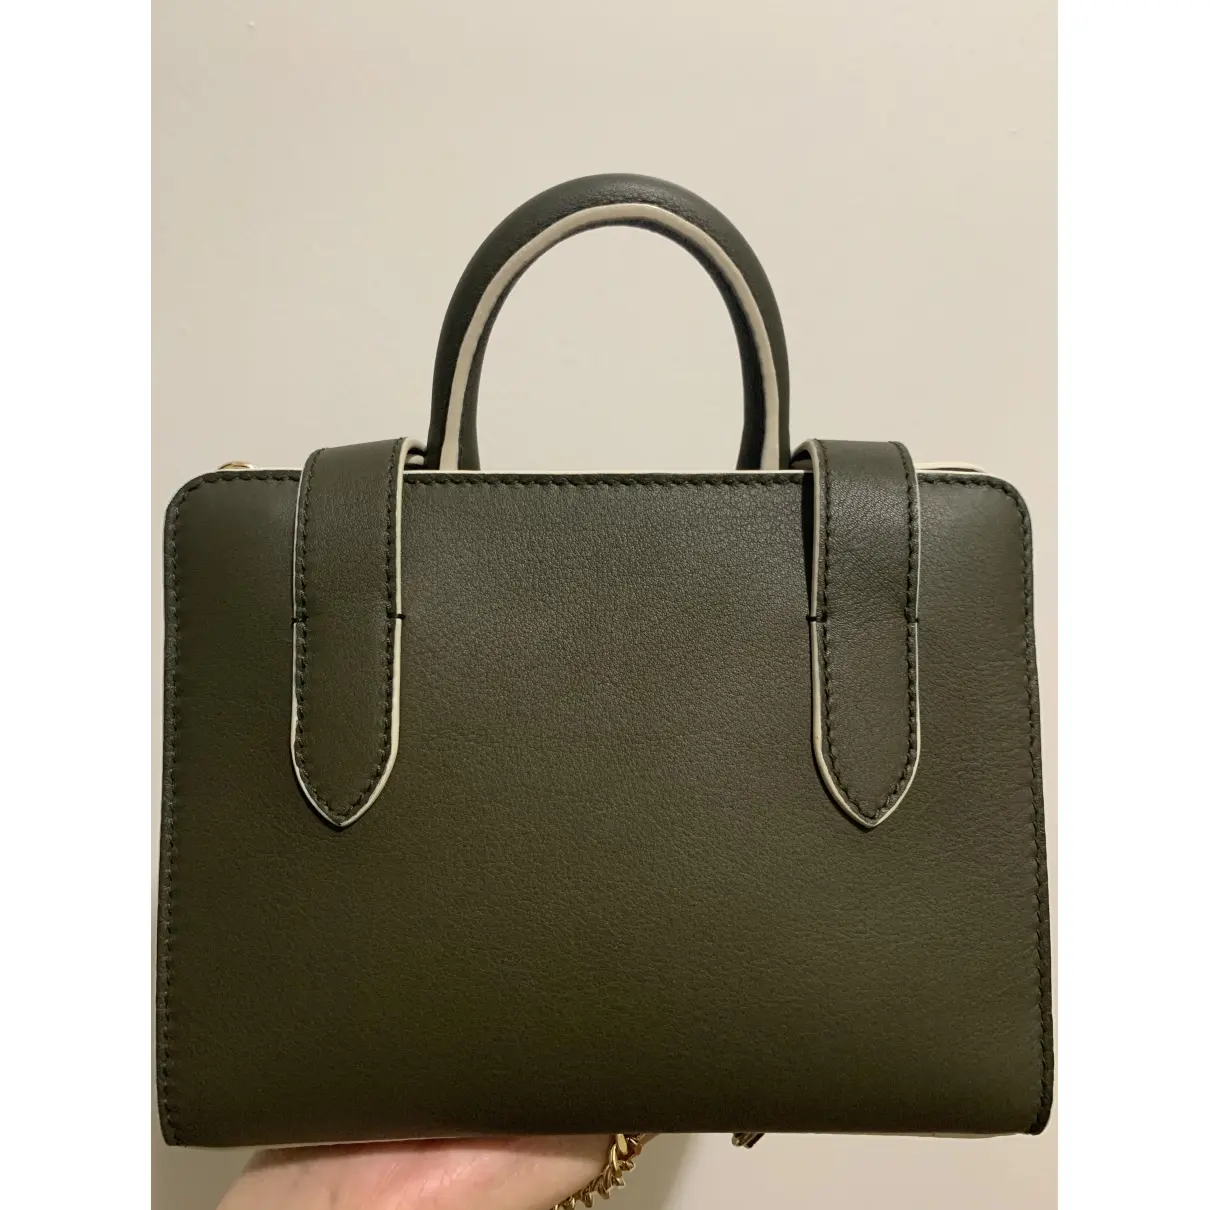 Buy Strathberry Leather mini bag online